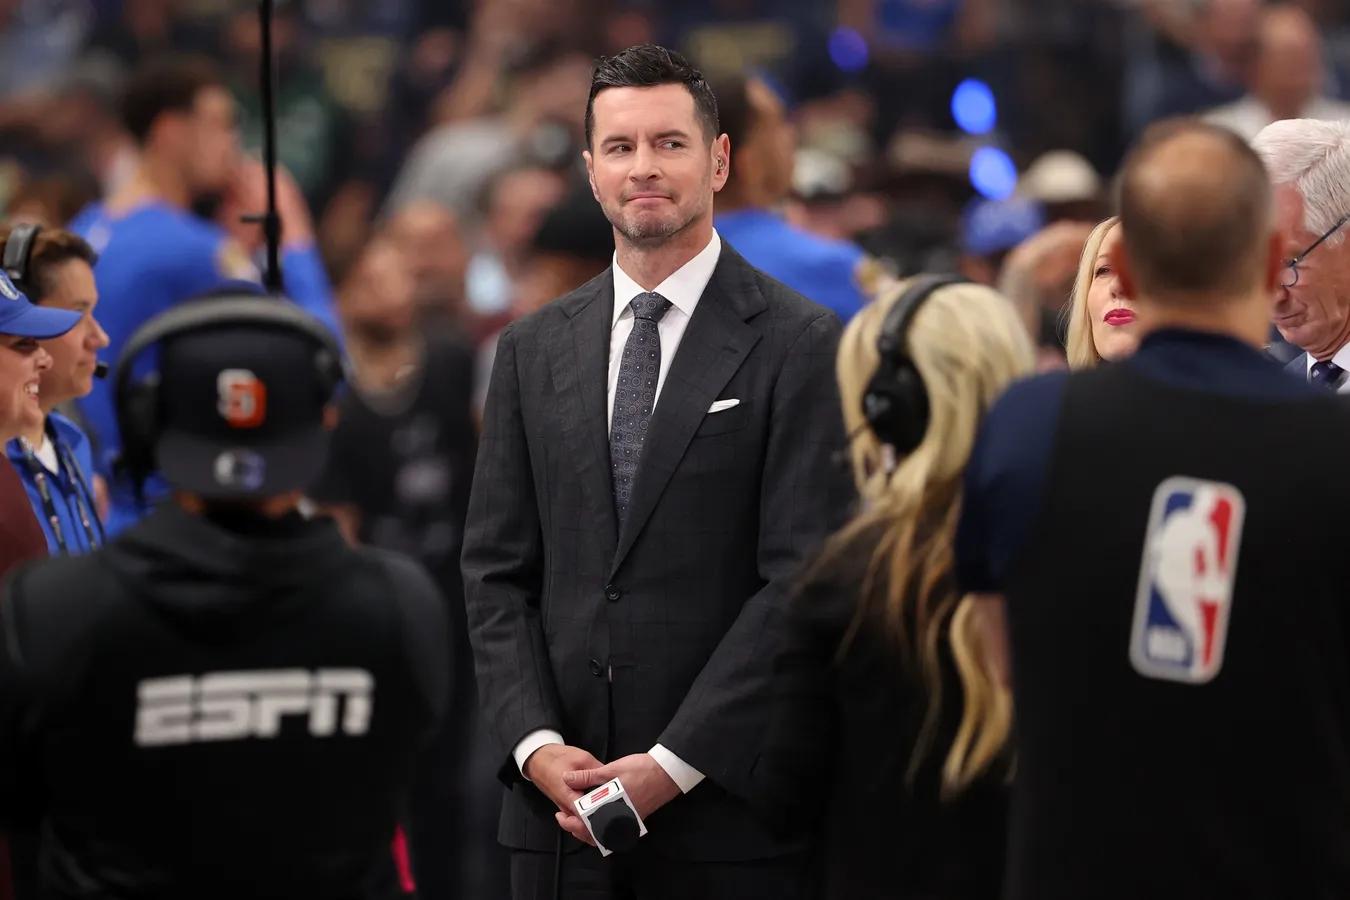 Lakers Reportedly Land on Redick to Take Over as Coach